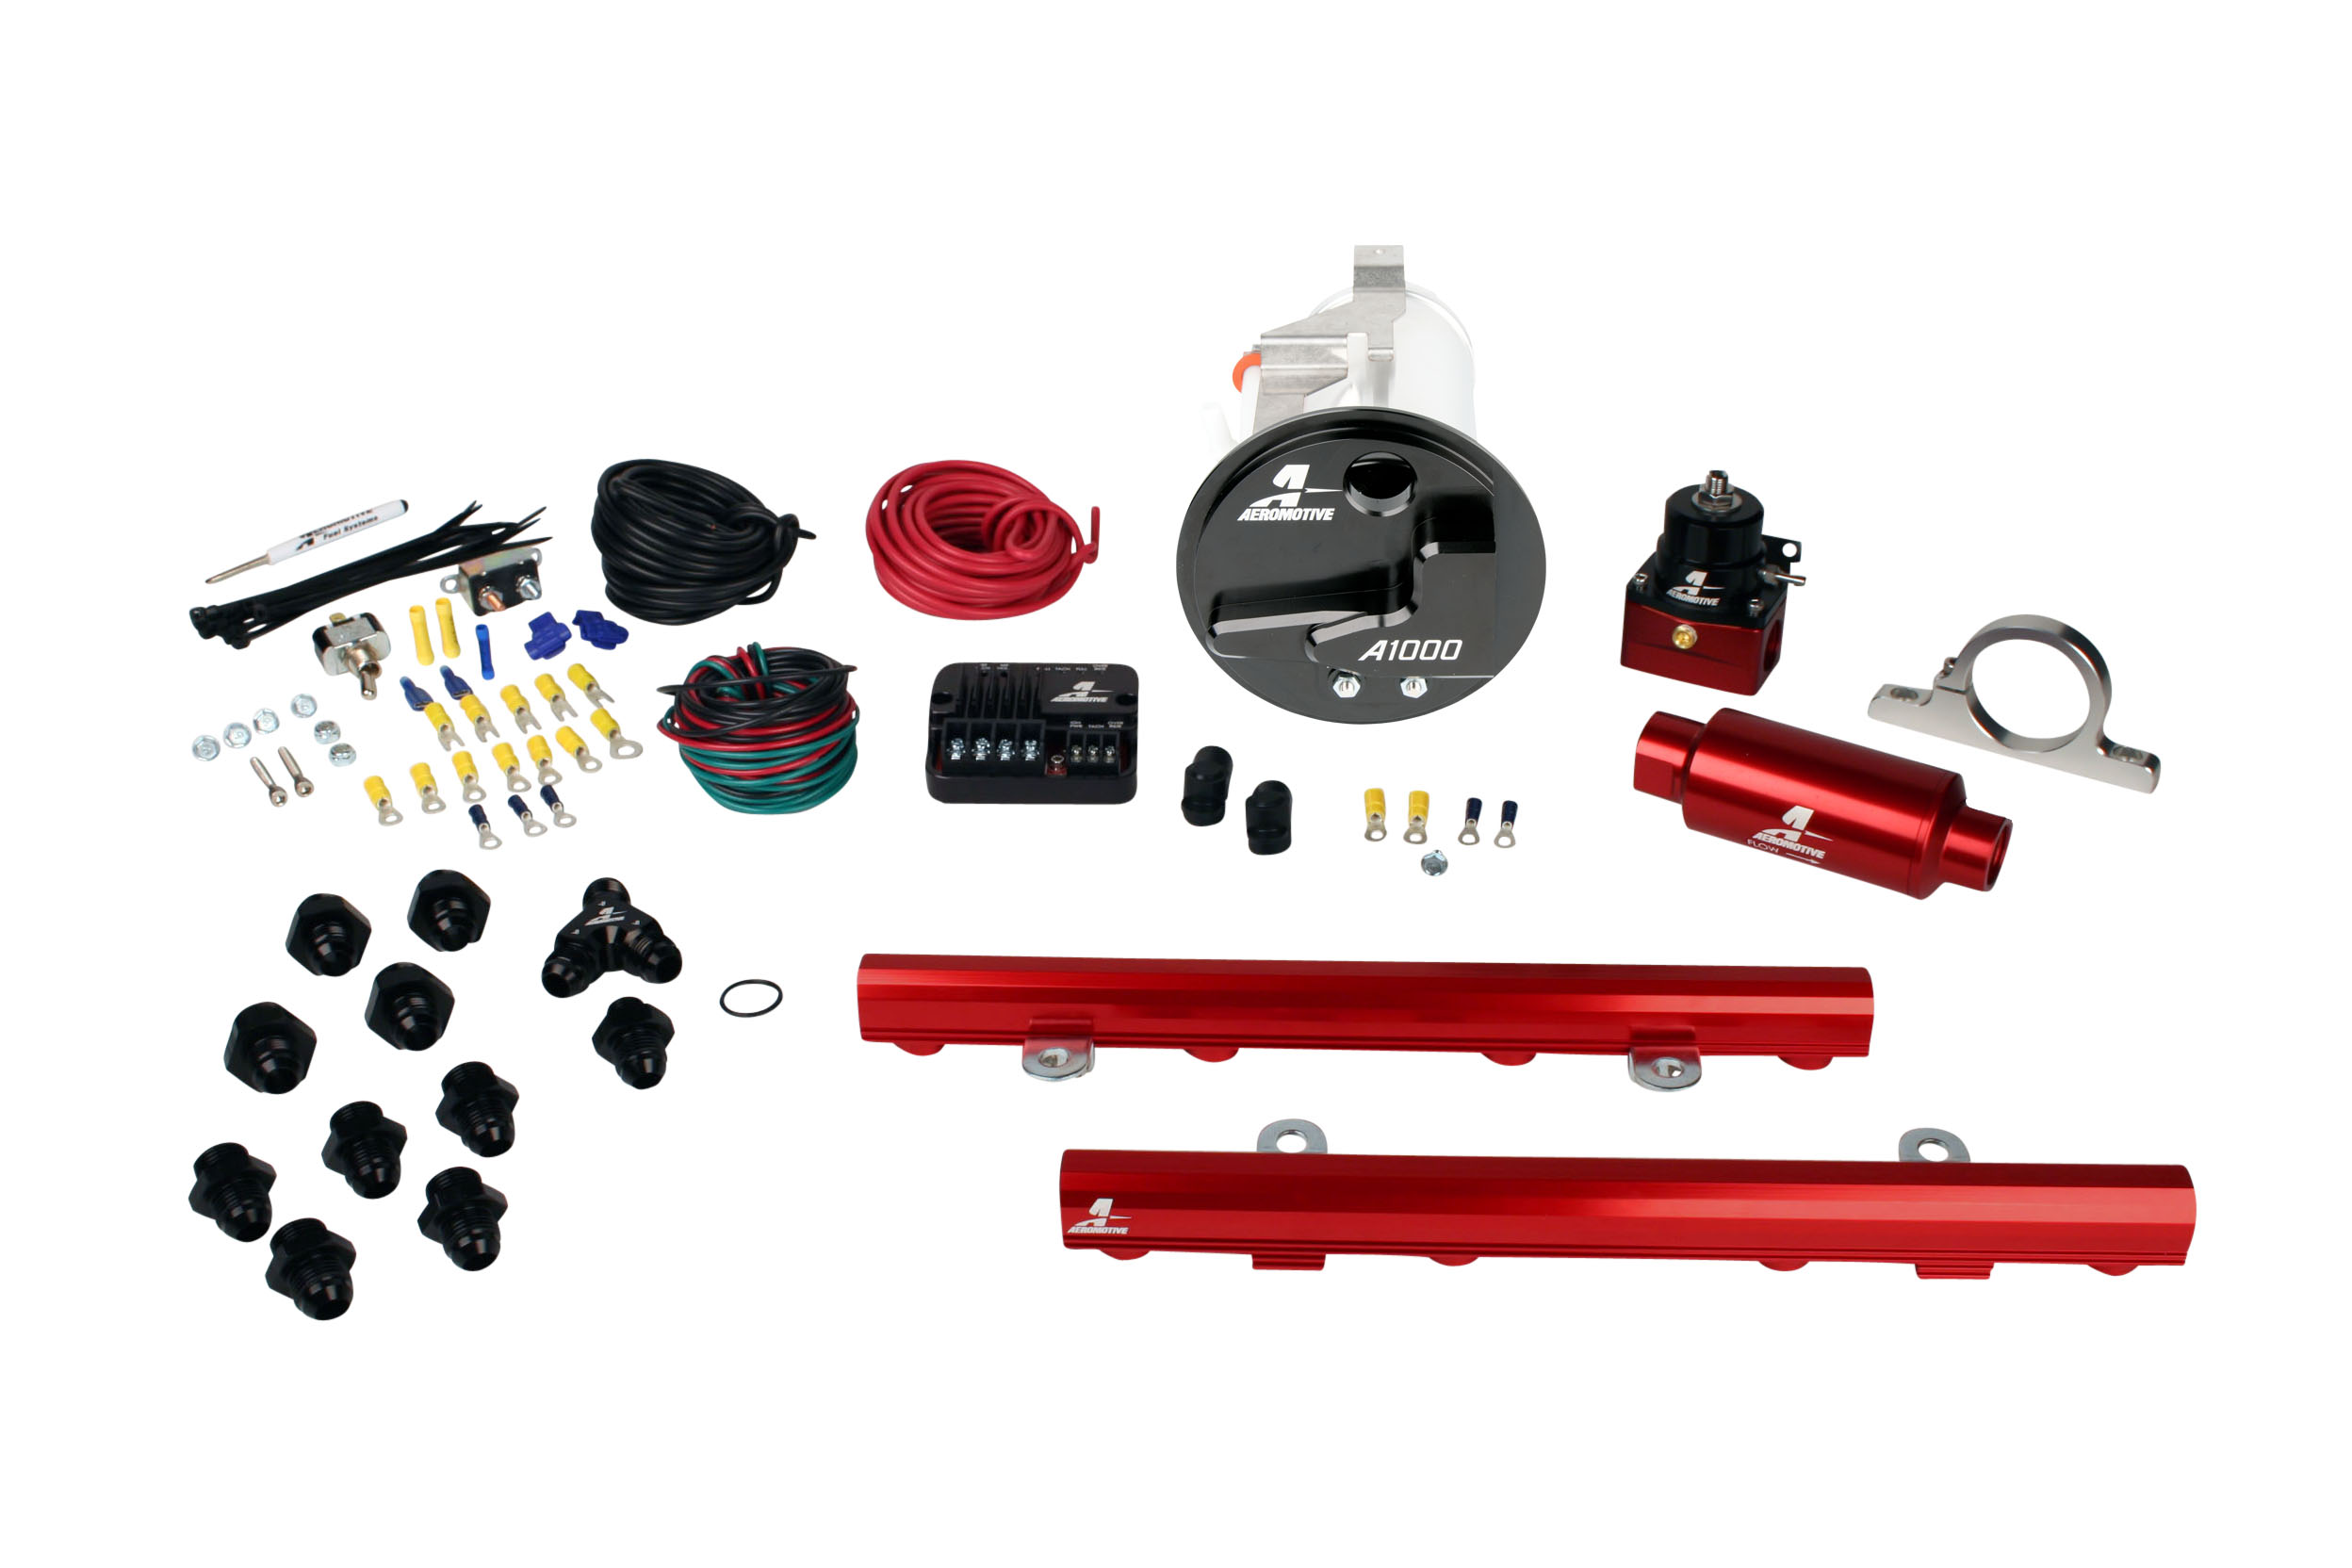 2005-2009 Ford Mustang GT Aeromotive Stealth A1000 Street Fuel System w/5.0L 4-V Fuel Rails Coyote Swap